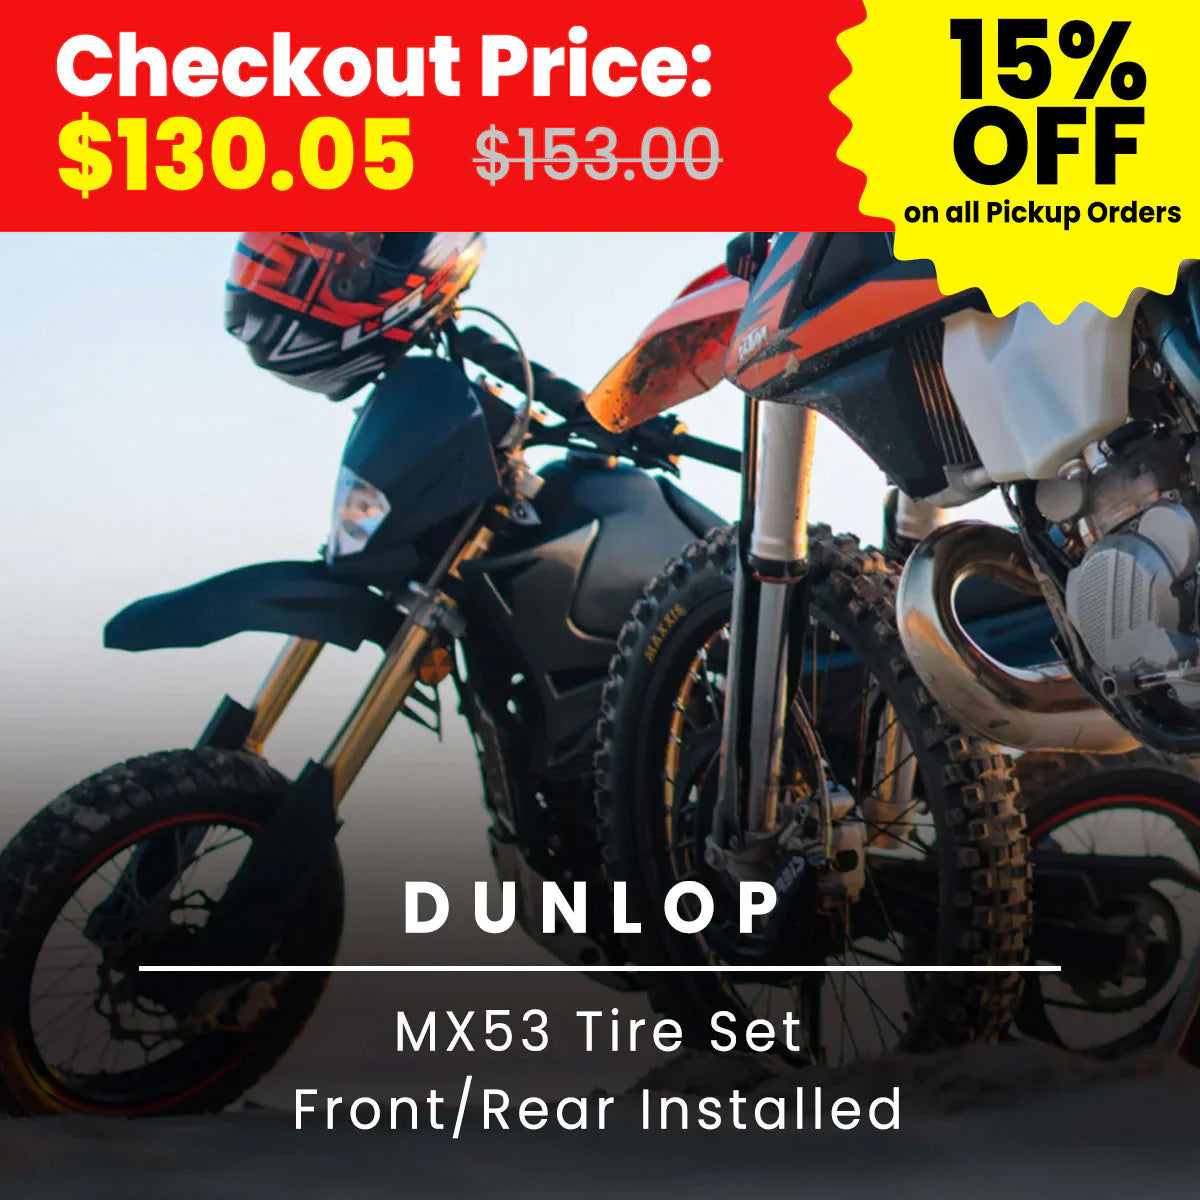 Motorcycle Dirtbike Dunlop MX53 Tire Set Front/Rear Installed (At Location: Fullerton CA)